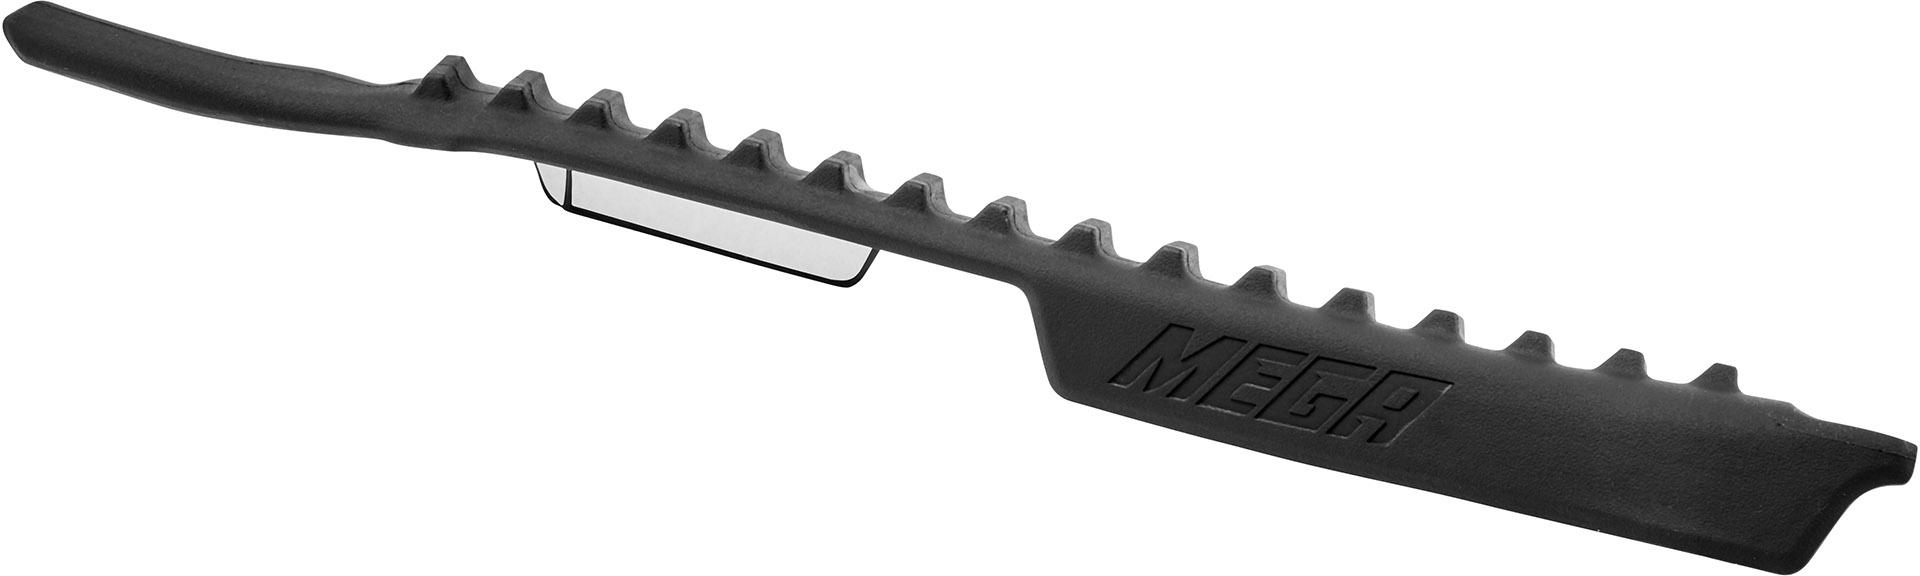 Nukeproof Mega Alloy Chain Stay Protector 275 - Neutral